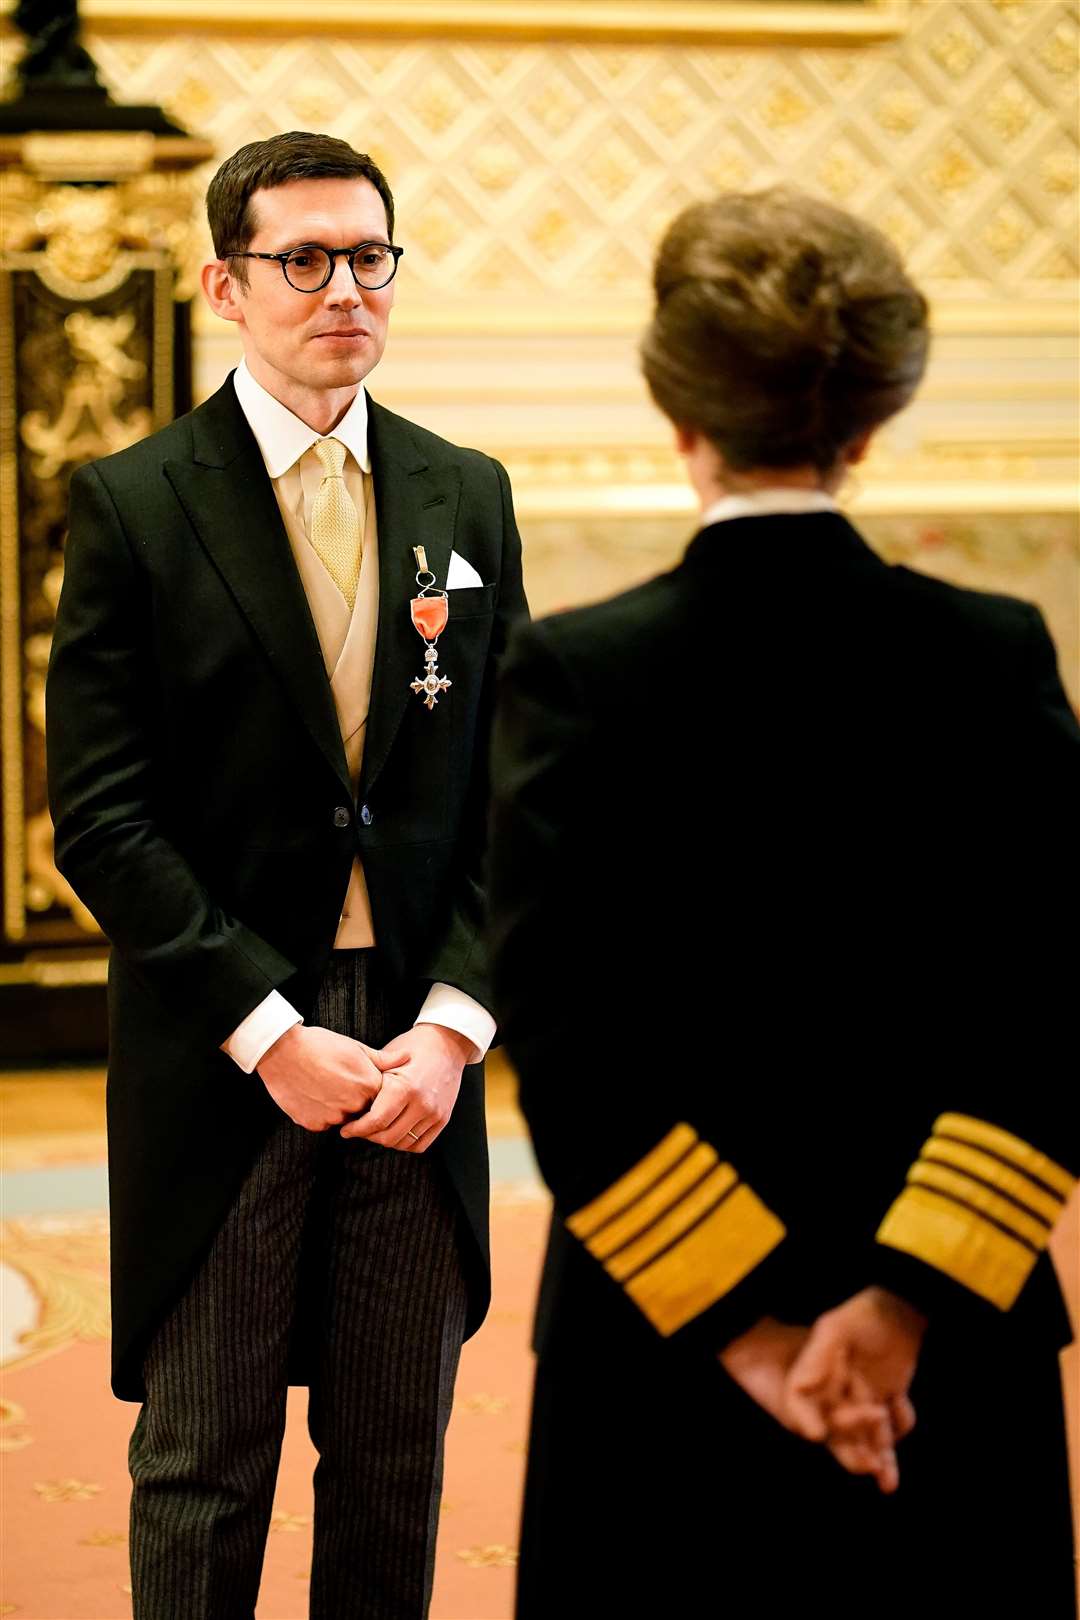 Erdem Moralioglu receives his honour from the Princess Royal (Aaron Chown/PA)